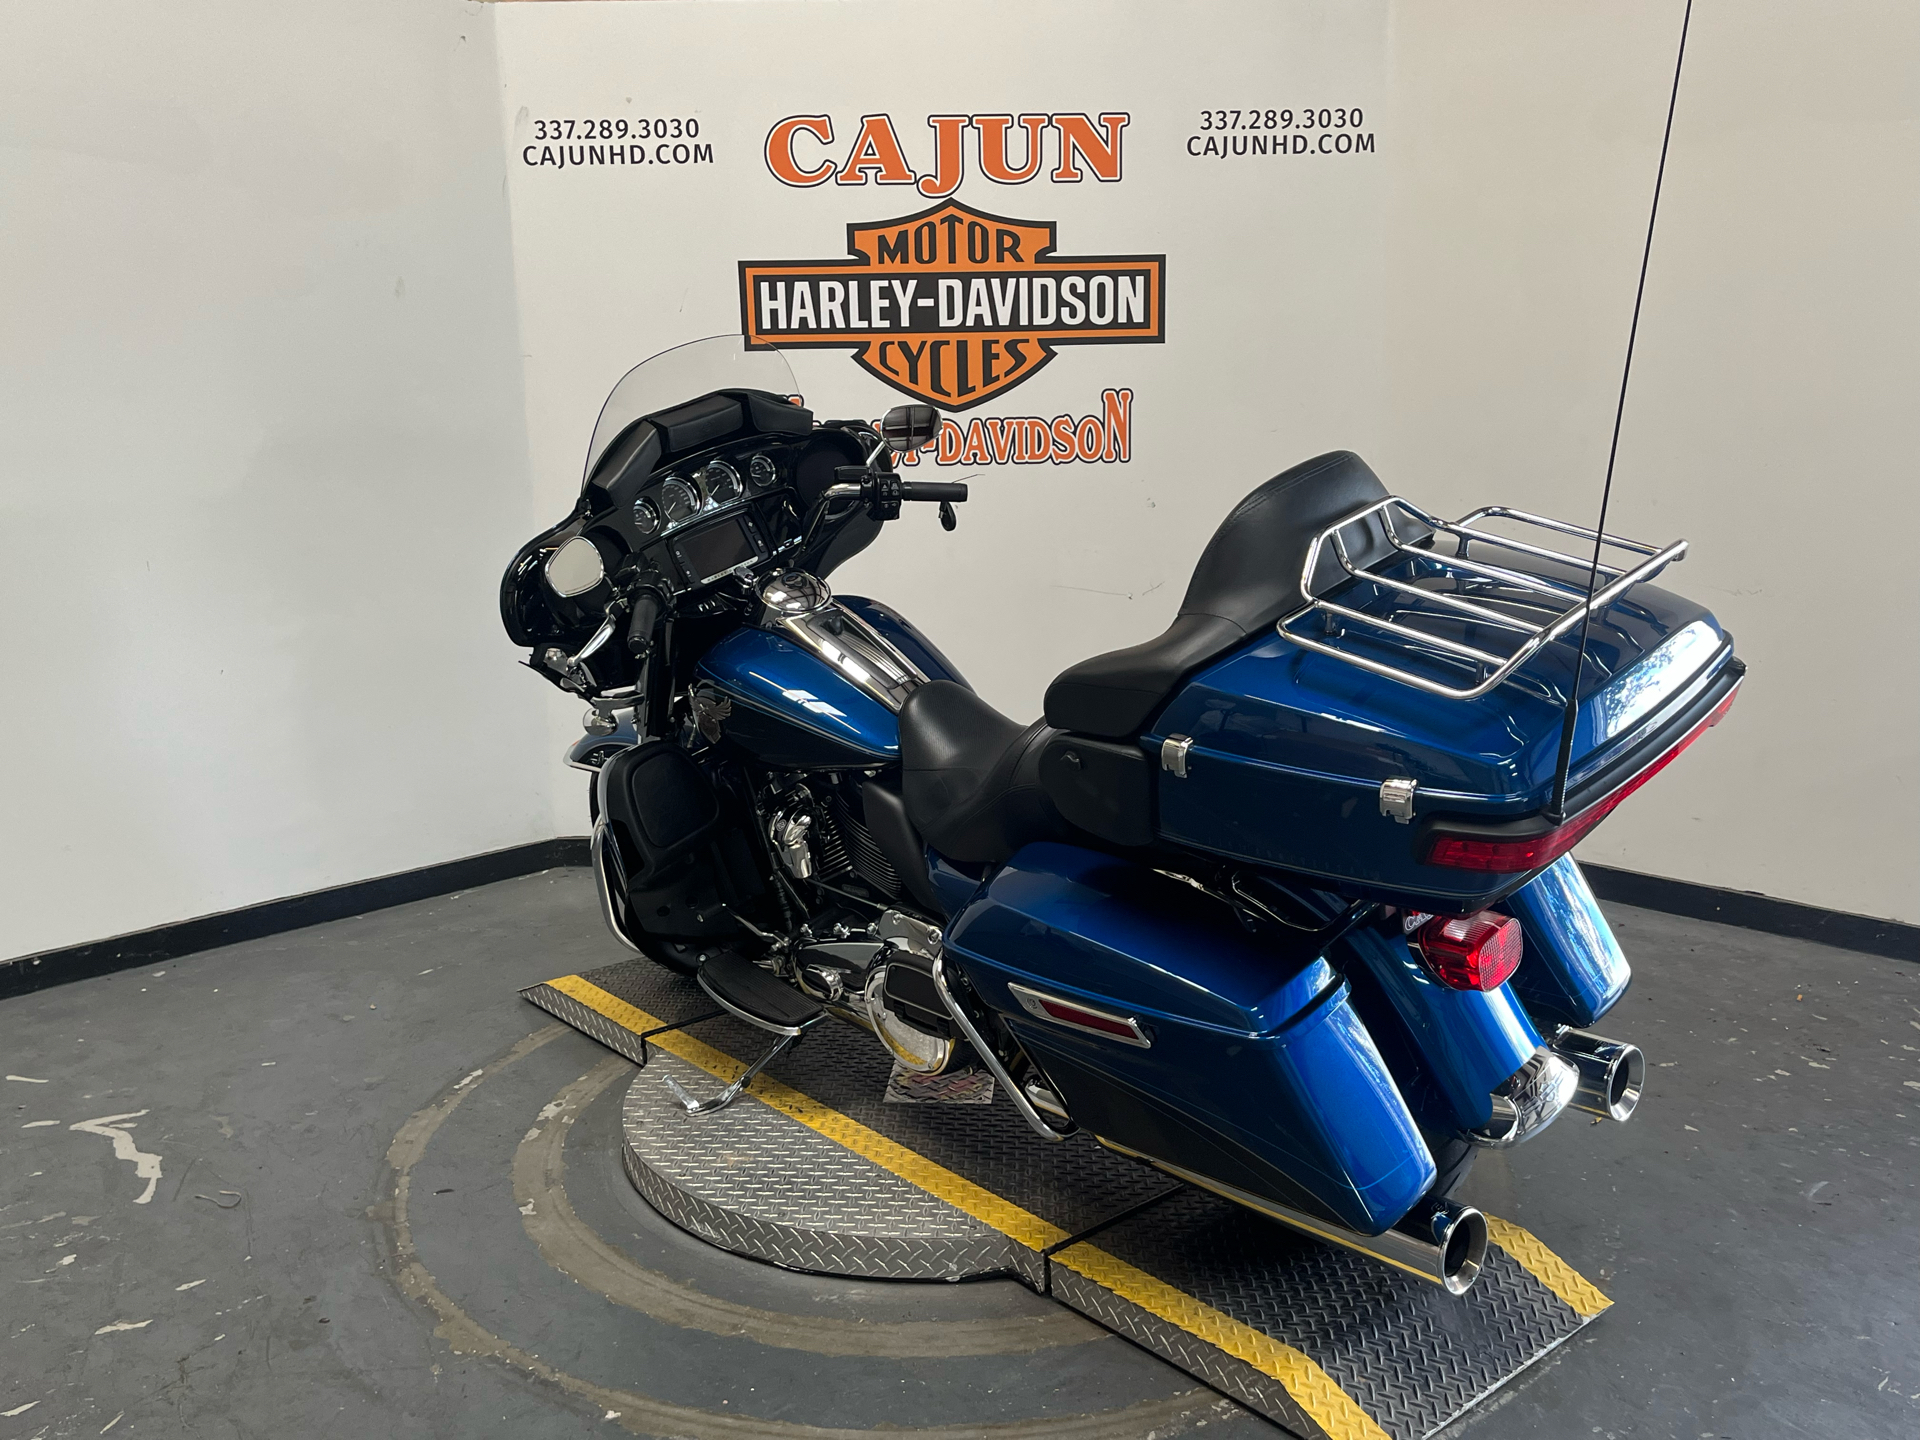 2018 Harley-Davidson Electra Glide Ultra Classic available now - Photo 6